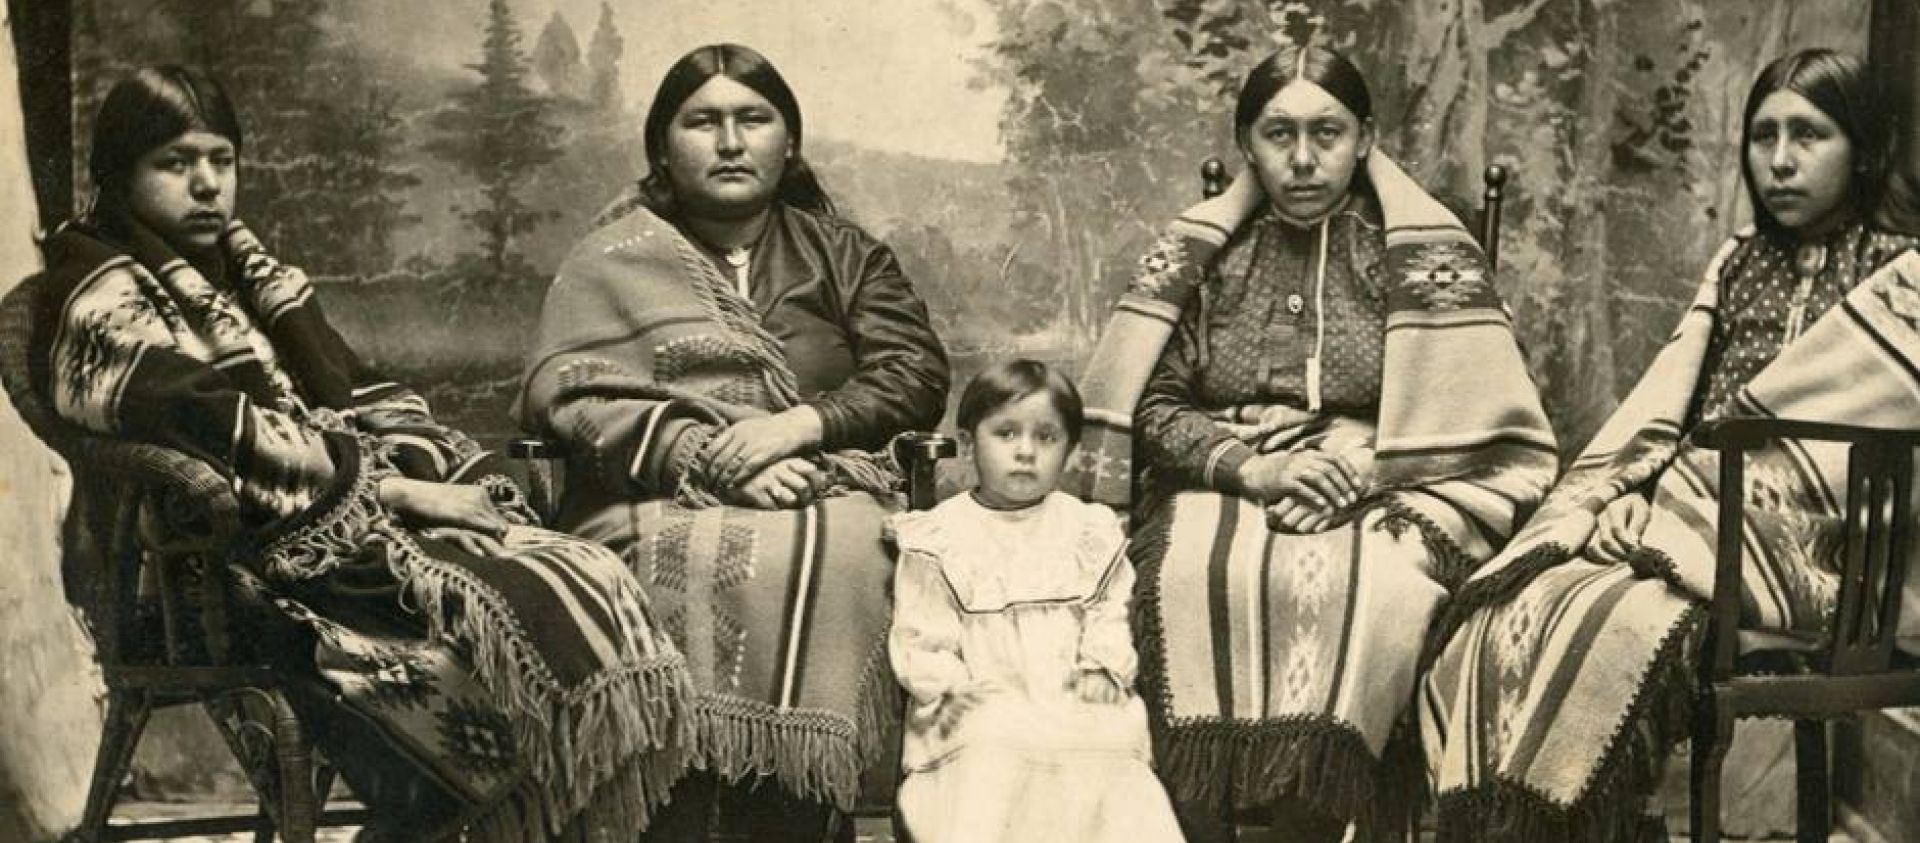 The following real photo postcard depicts four Osage women and a young child from around 1910. The woman second from the right was Louise Tuman, wife of Chief Black Dog.